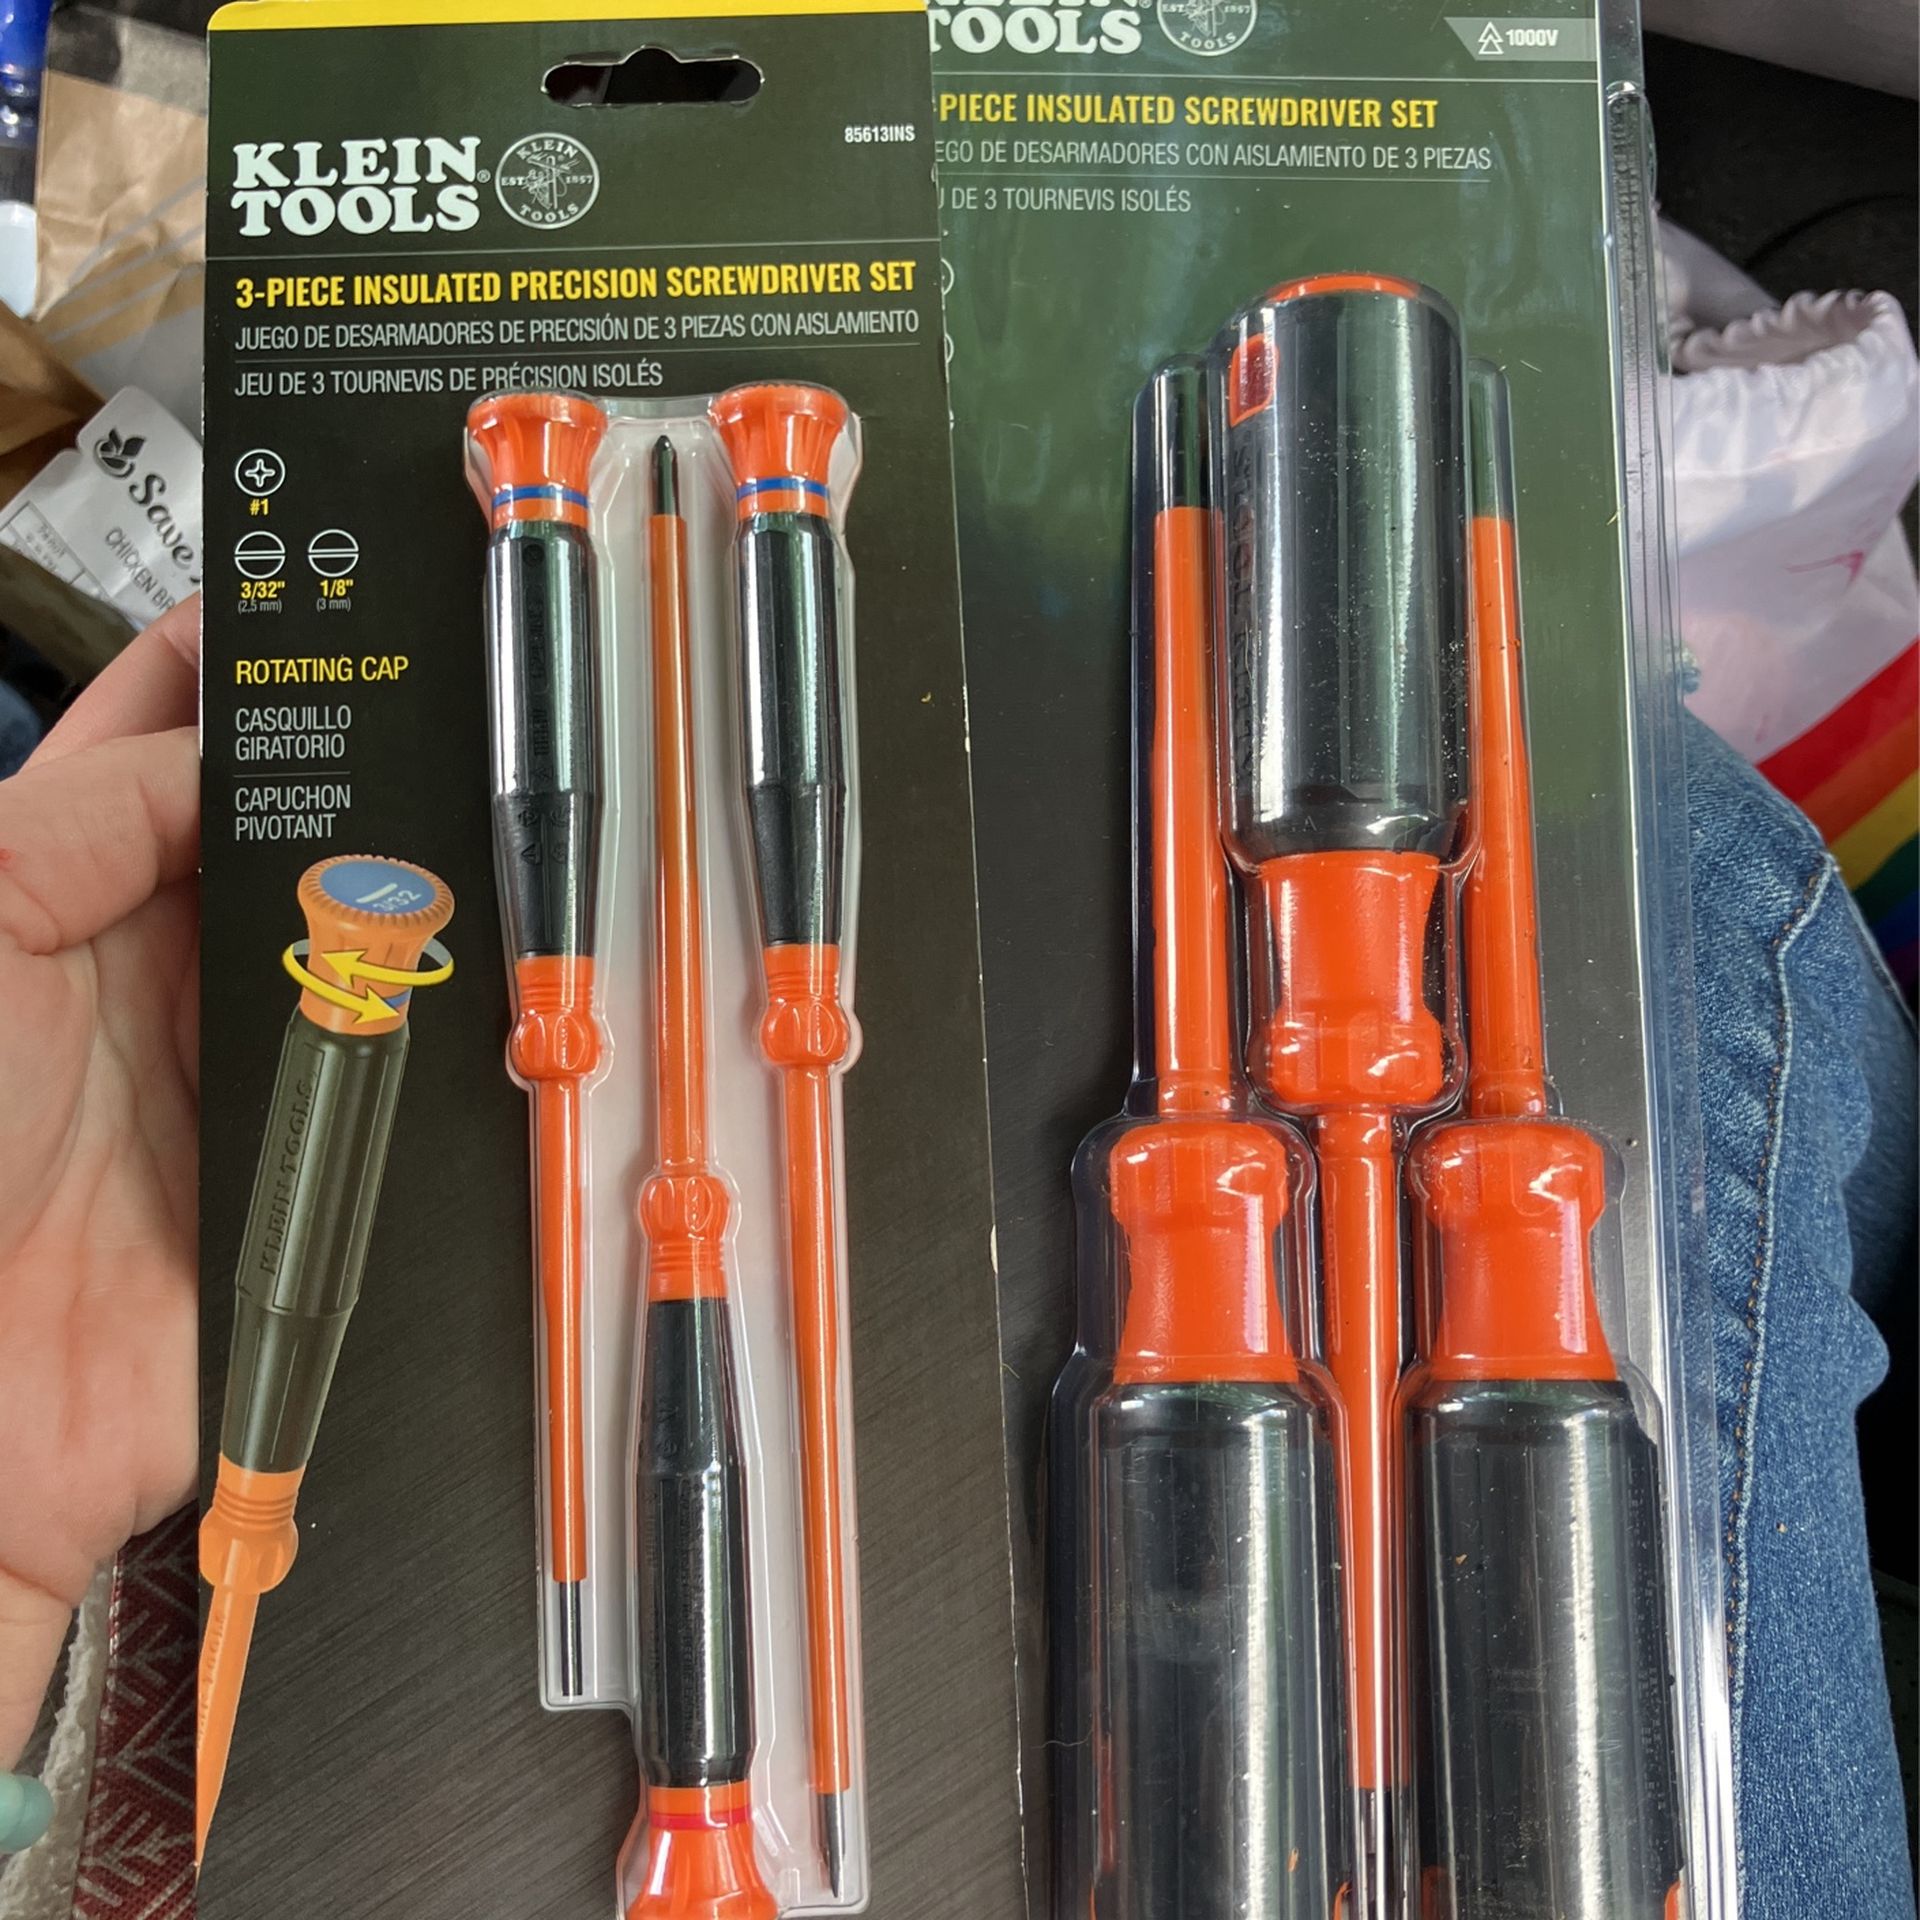 Klein Tools 2-3 Piece Insulated Screw Driver Sets